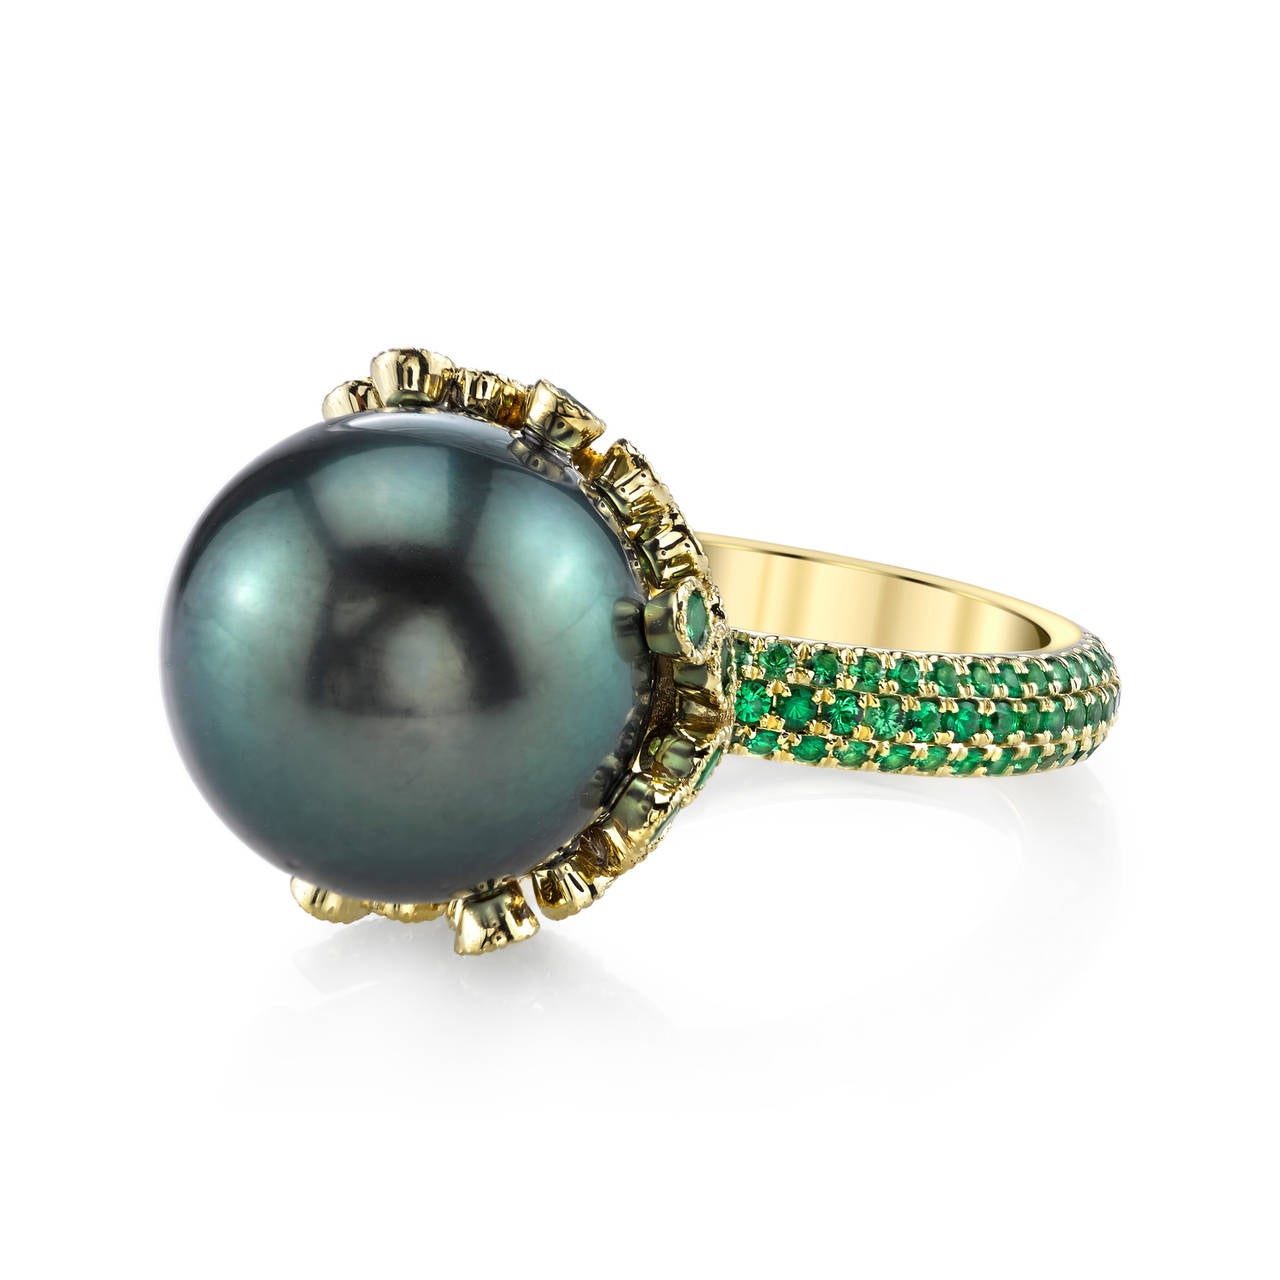 This stunning ring features a 15mm Tahitian Pearl that has been hand-selected for its natural shape and iridescent color. 

Due to their naturally dark color, Tahitian pearls have become some of the most sought after, expensive pearls in the